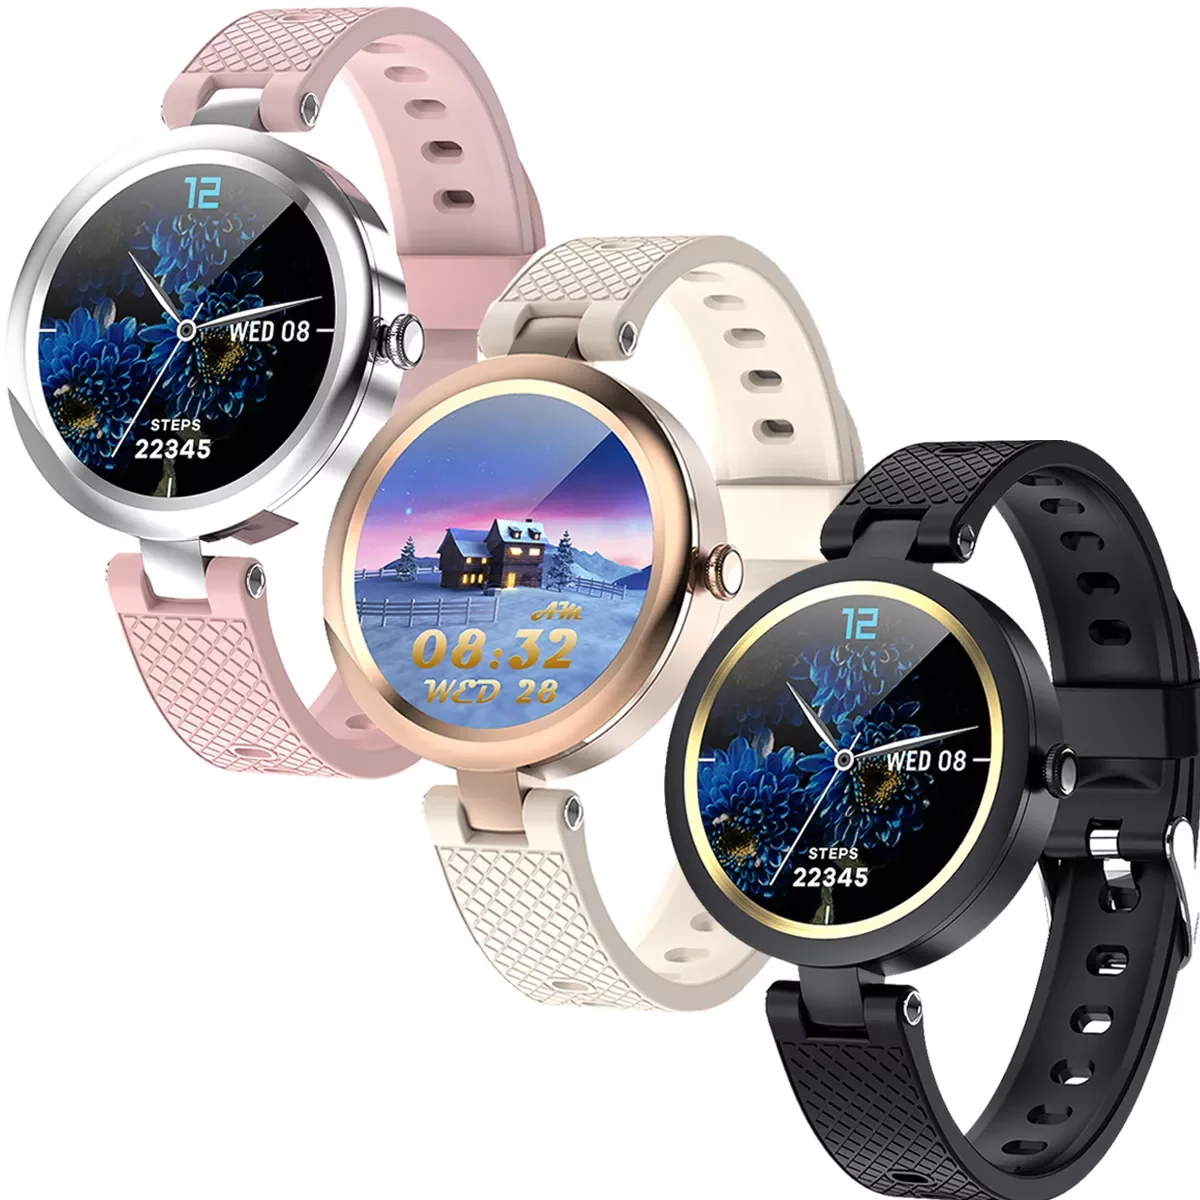 

T8 Bluetooth Smart Watch With Camera Support SIM TF Card Pedometer Men Women Call Sport Smartwatch For Android Phone PK Q18 DZ09